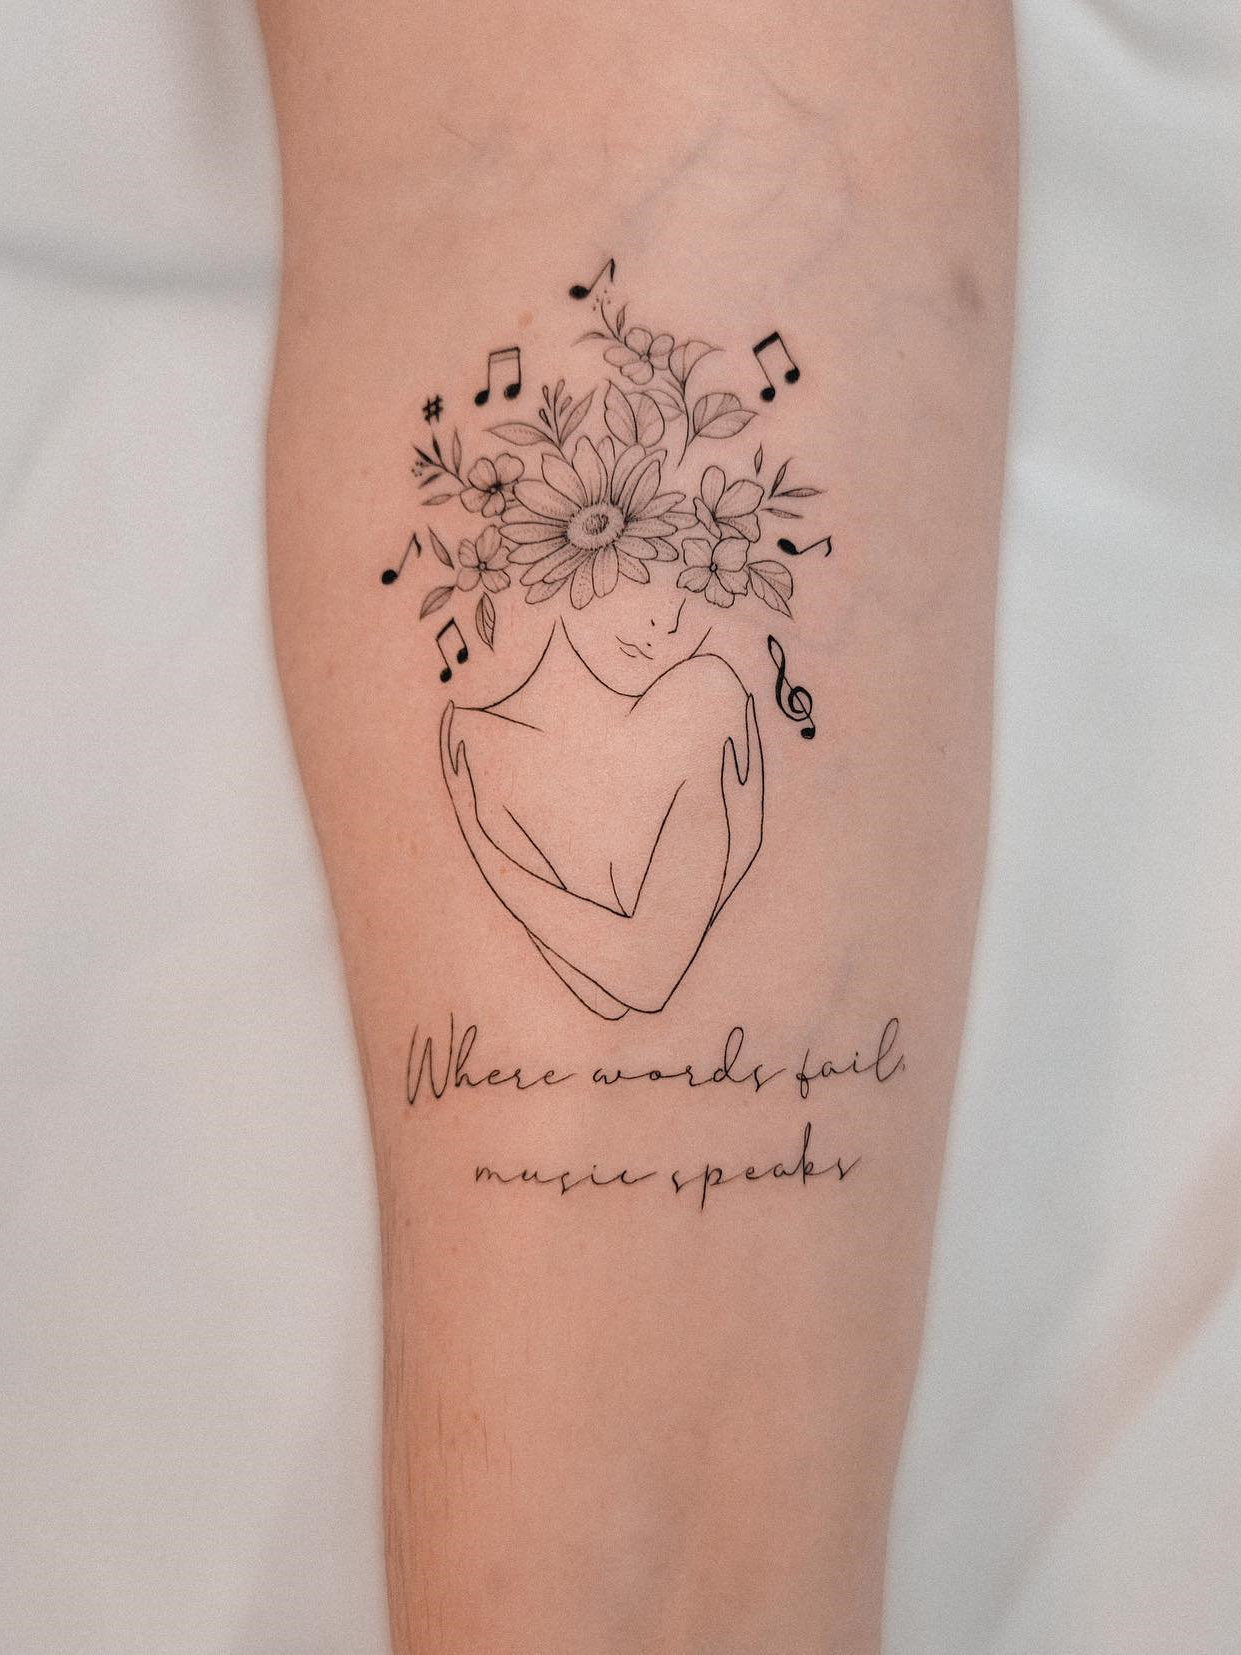 Simple Tattoo Designs for Women